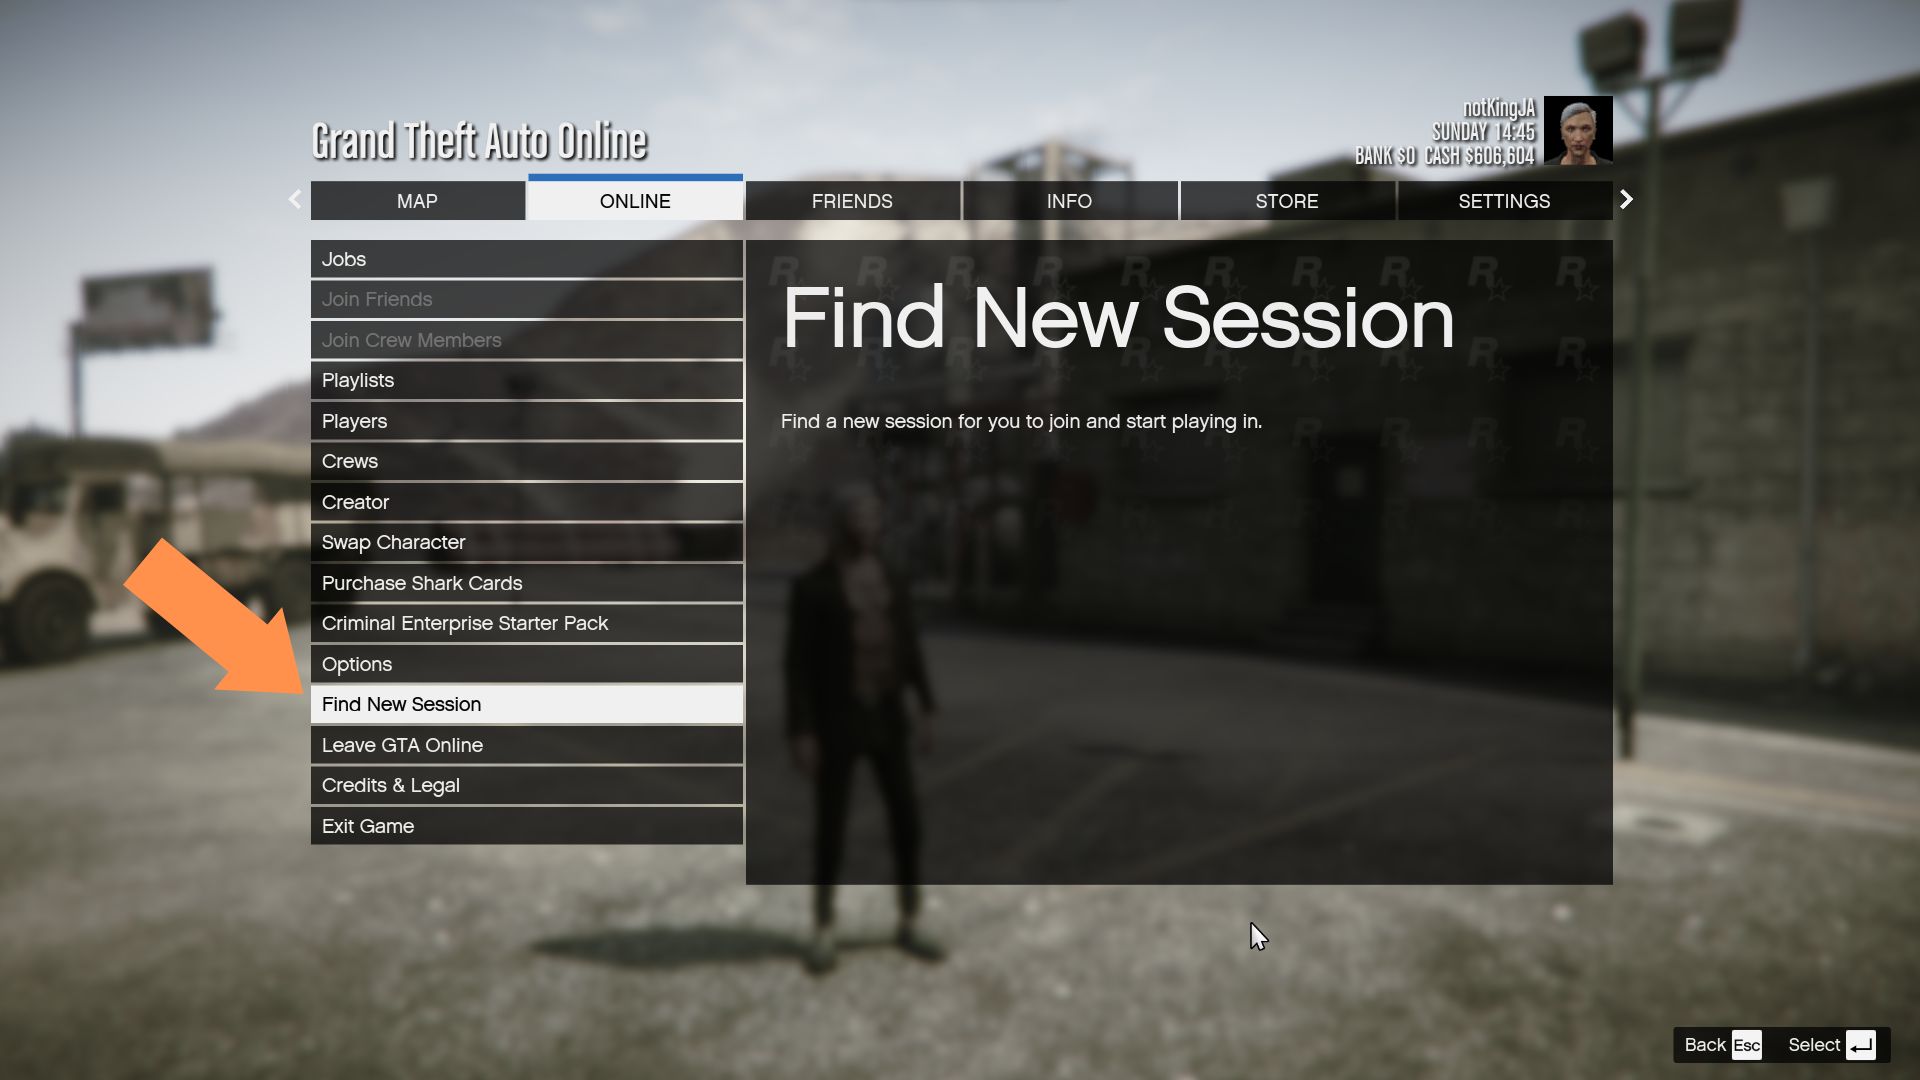 Find a new session to quit missions in GTA Online